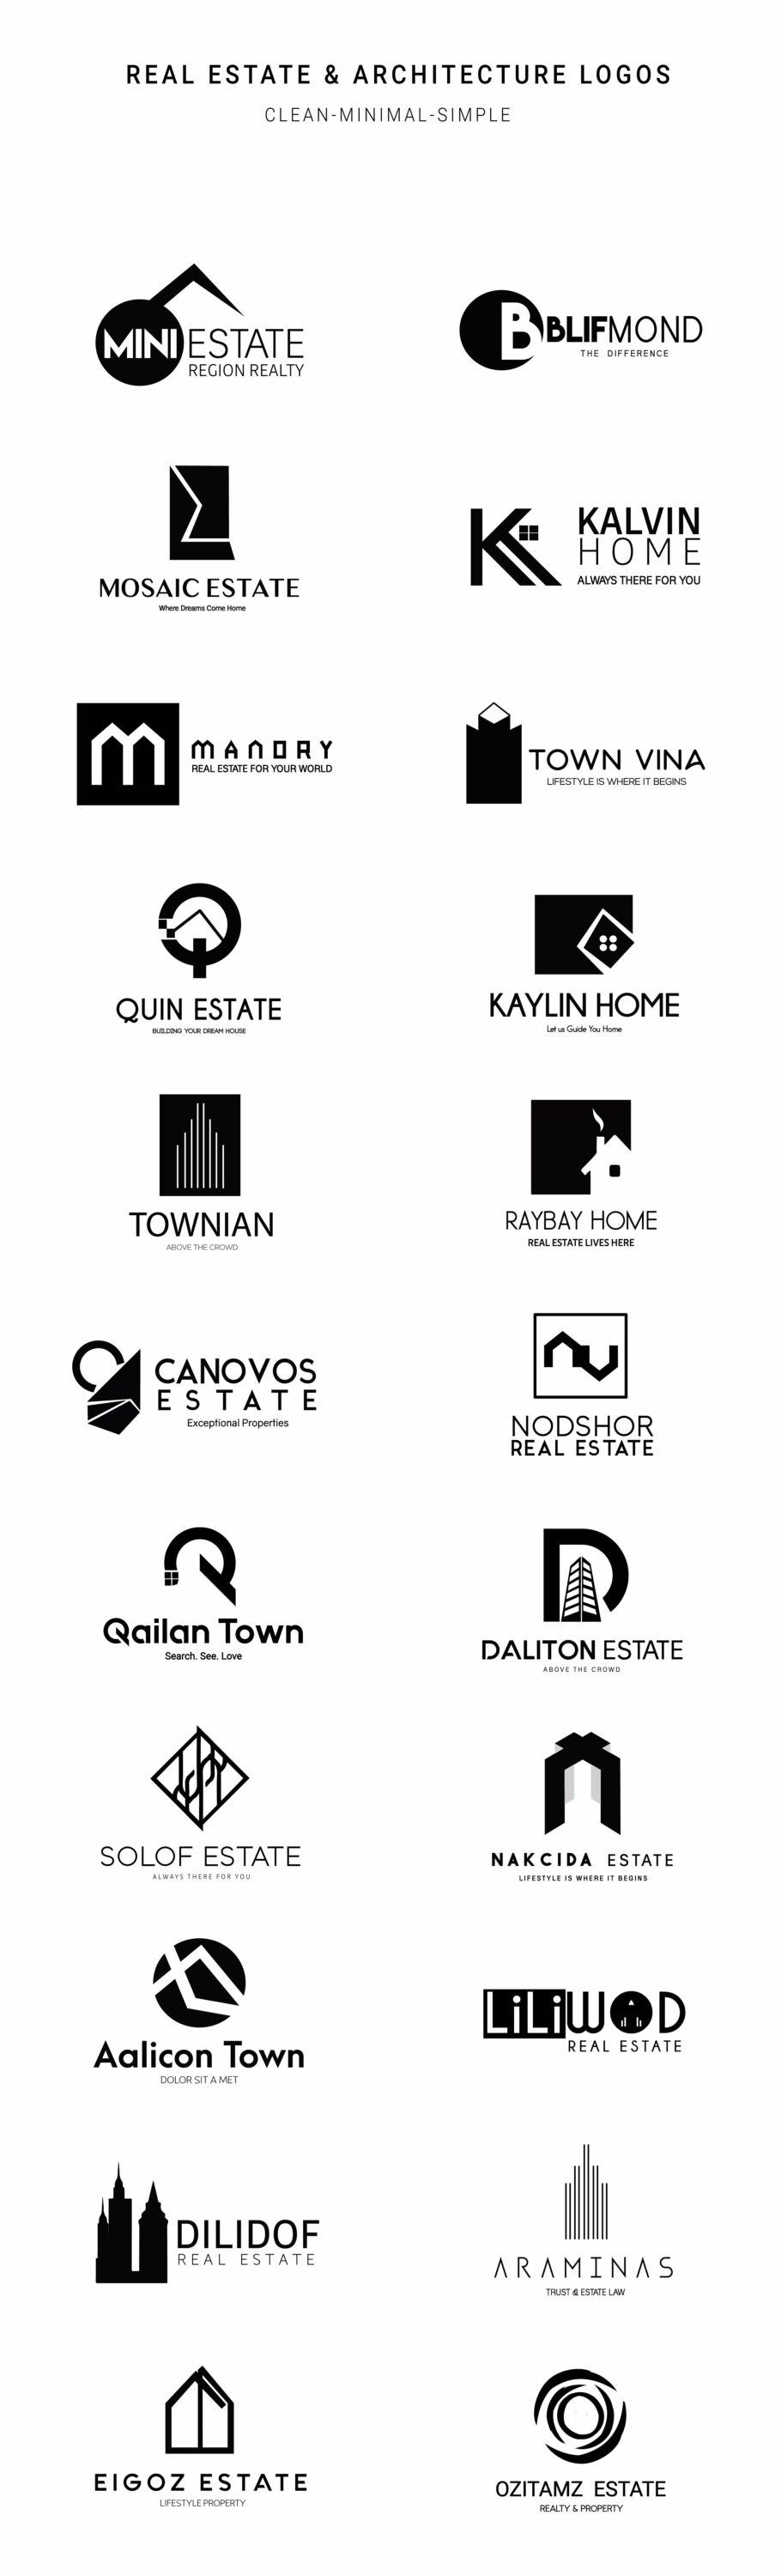 Black logos collection for real estate industry.